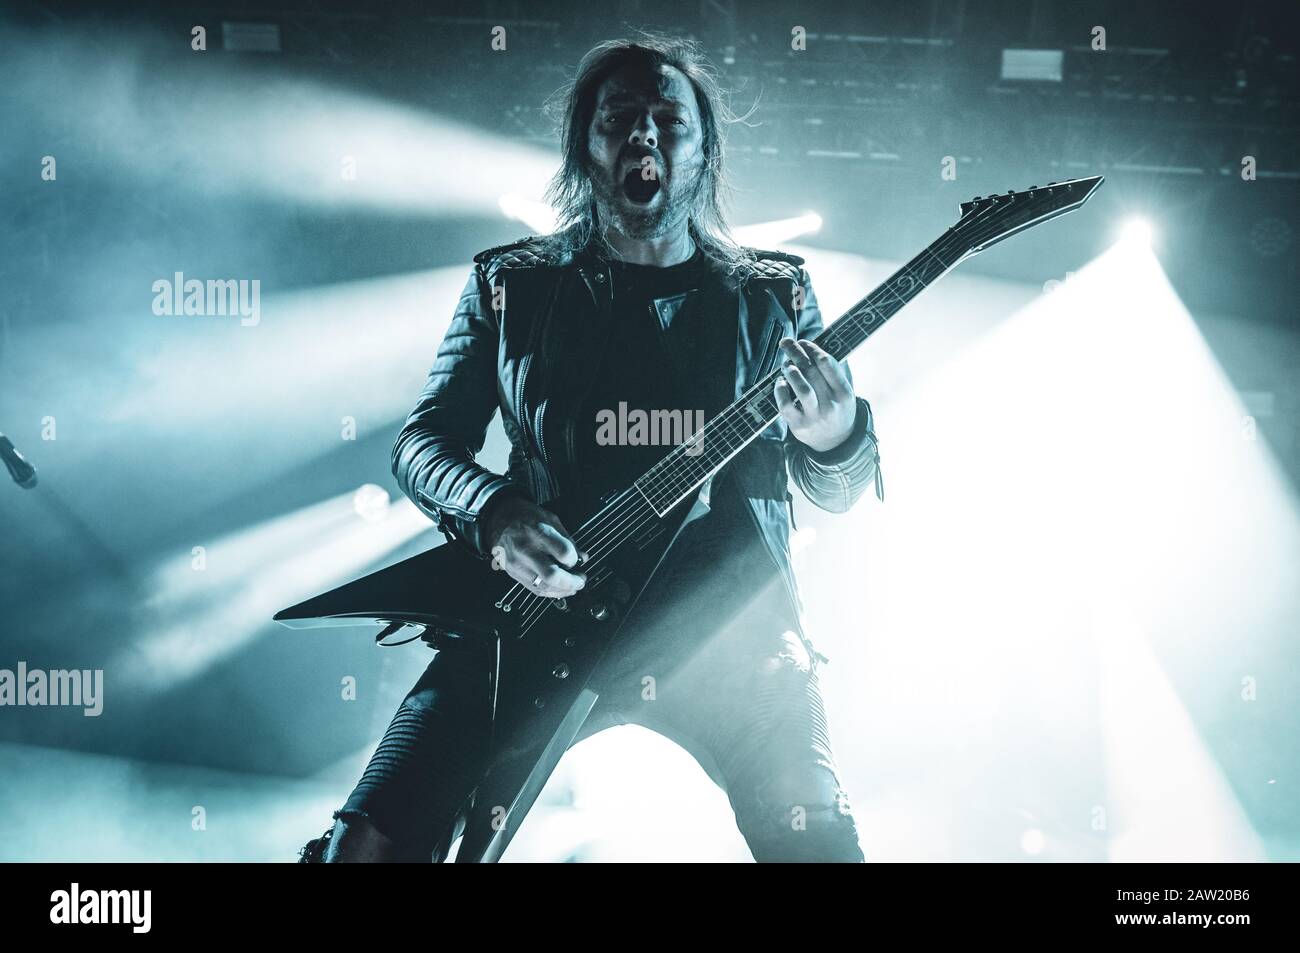 Copenhagen, Denmark. 21st, 2018. Bullet for My Valentine, the Welsh heavy metal band, performs a live concert during the Danish heavy metal festival Copenhell 2018 in Copenhagen. Here guitarist Michael Paget is seen live on stage. (Photo credit: Gonzales Photo - Nikolaj Bransholm). Stock Photo